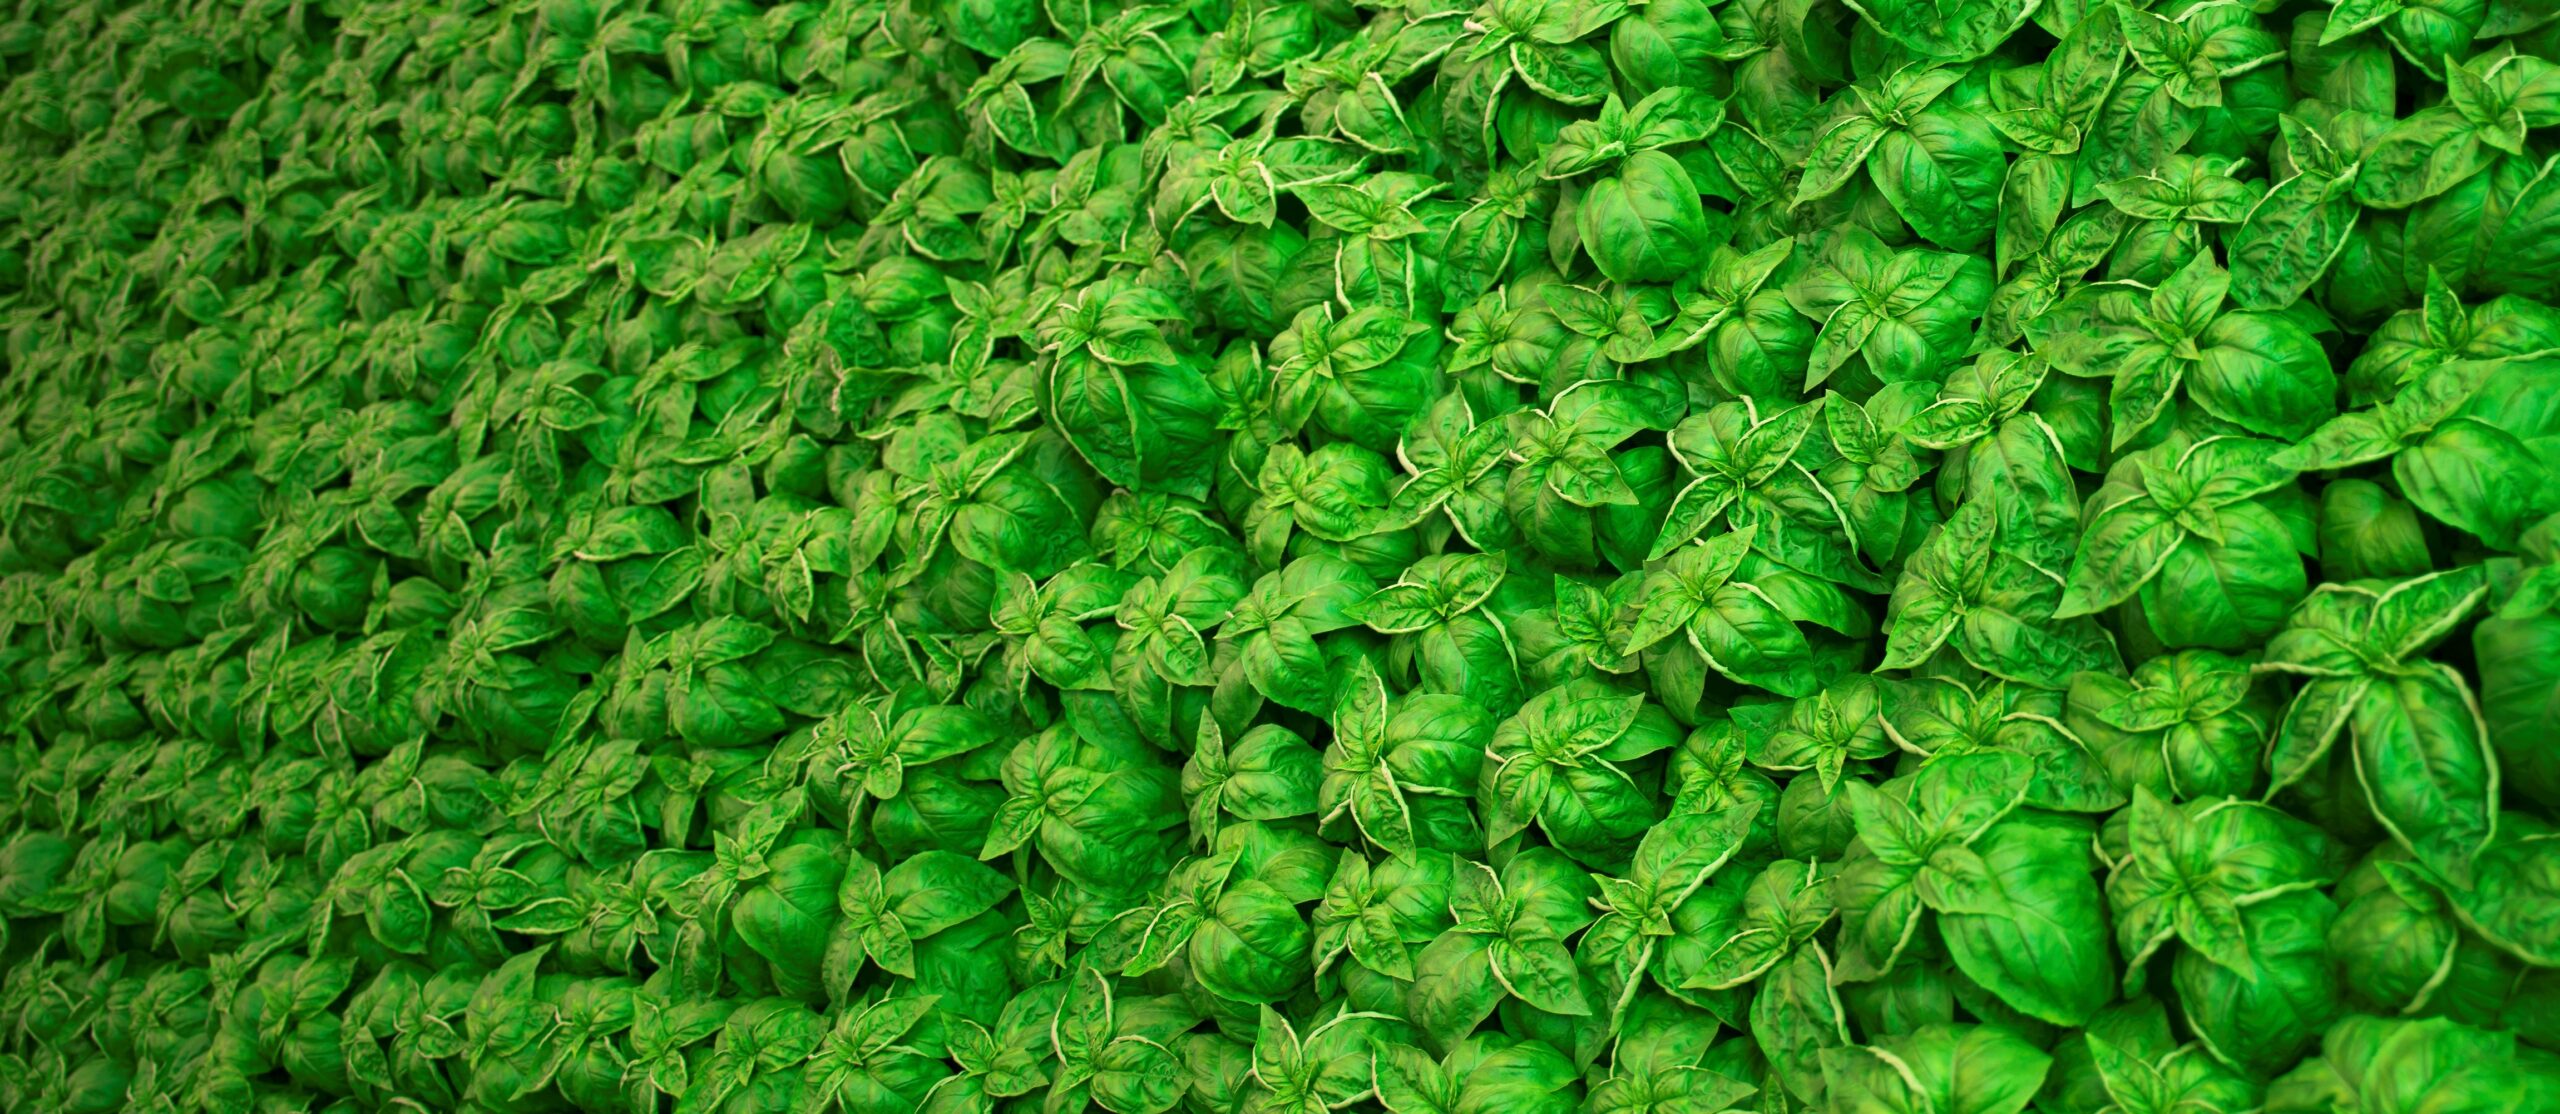 Featured image for “Hydroponic greens producer Lakeland Fresh Farms partners with regional distributor”